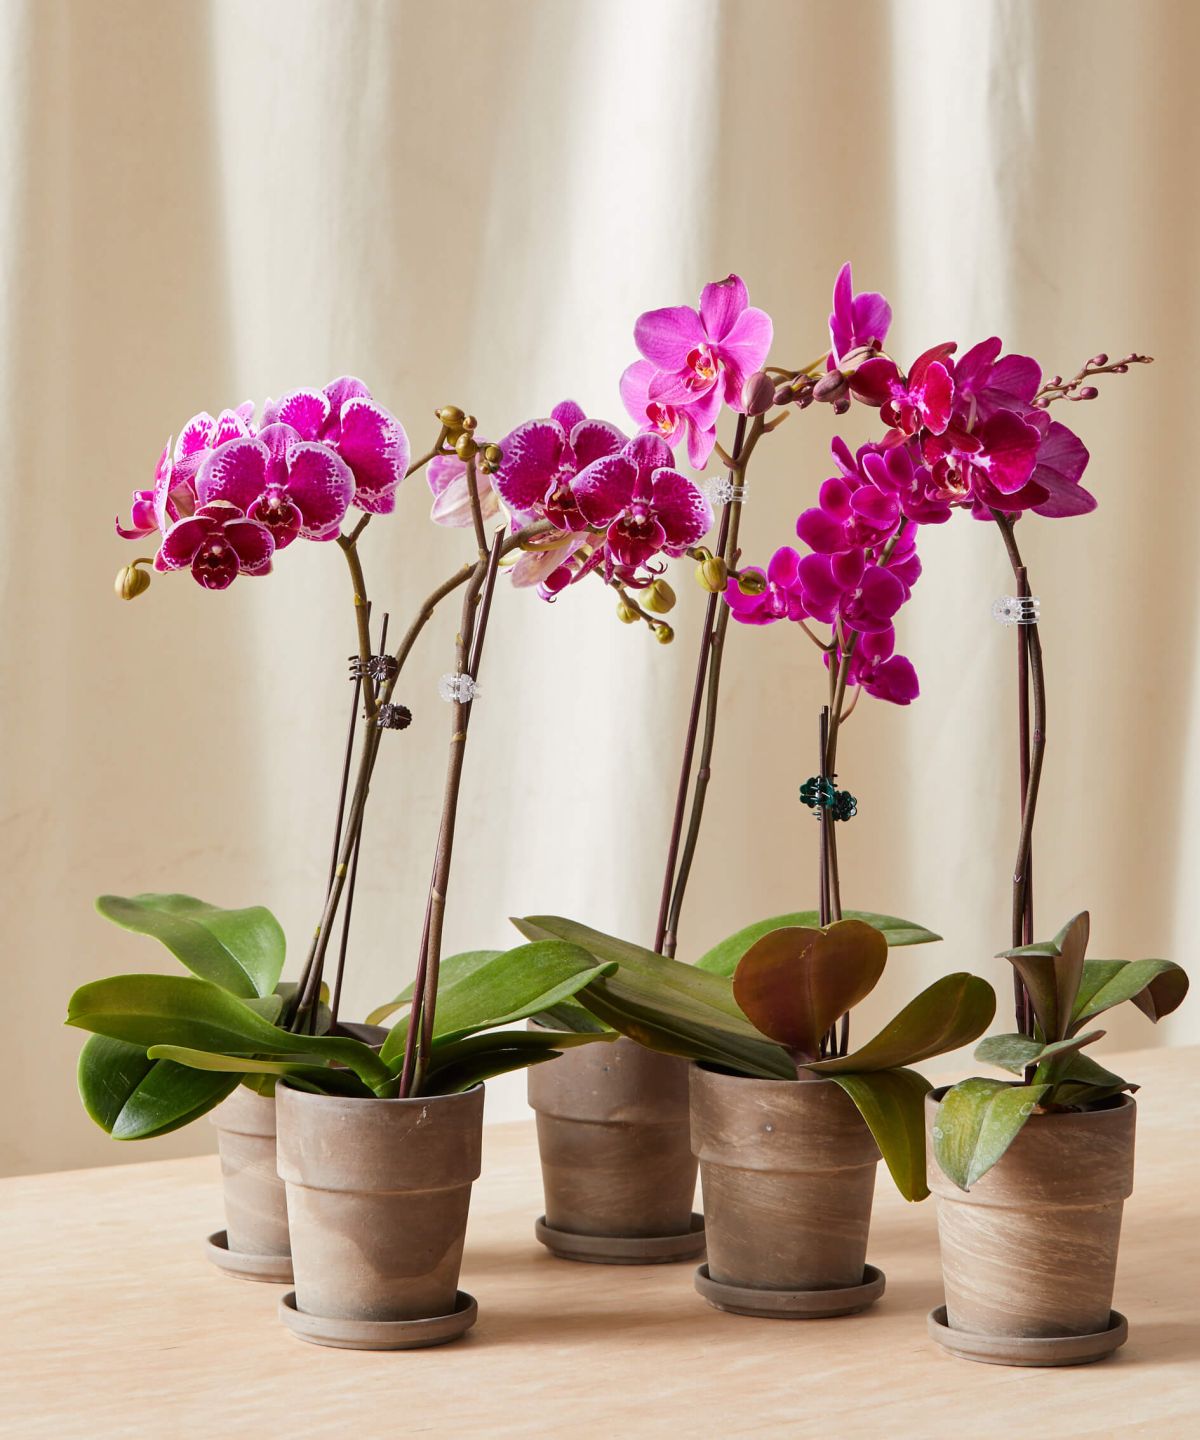 How Often Should I Water My Orchid